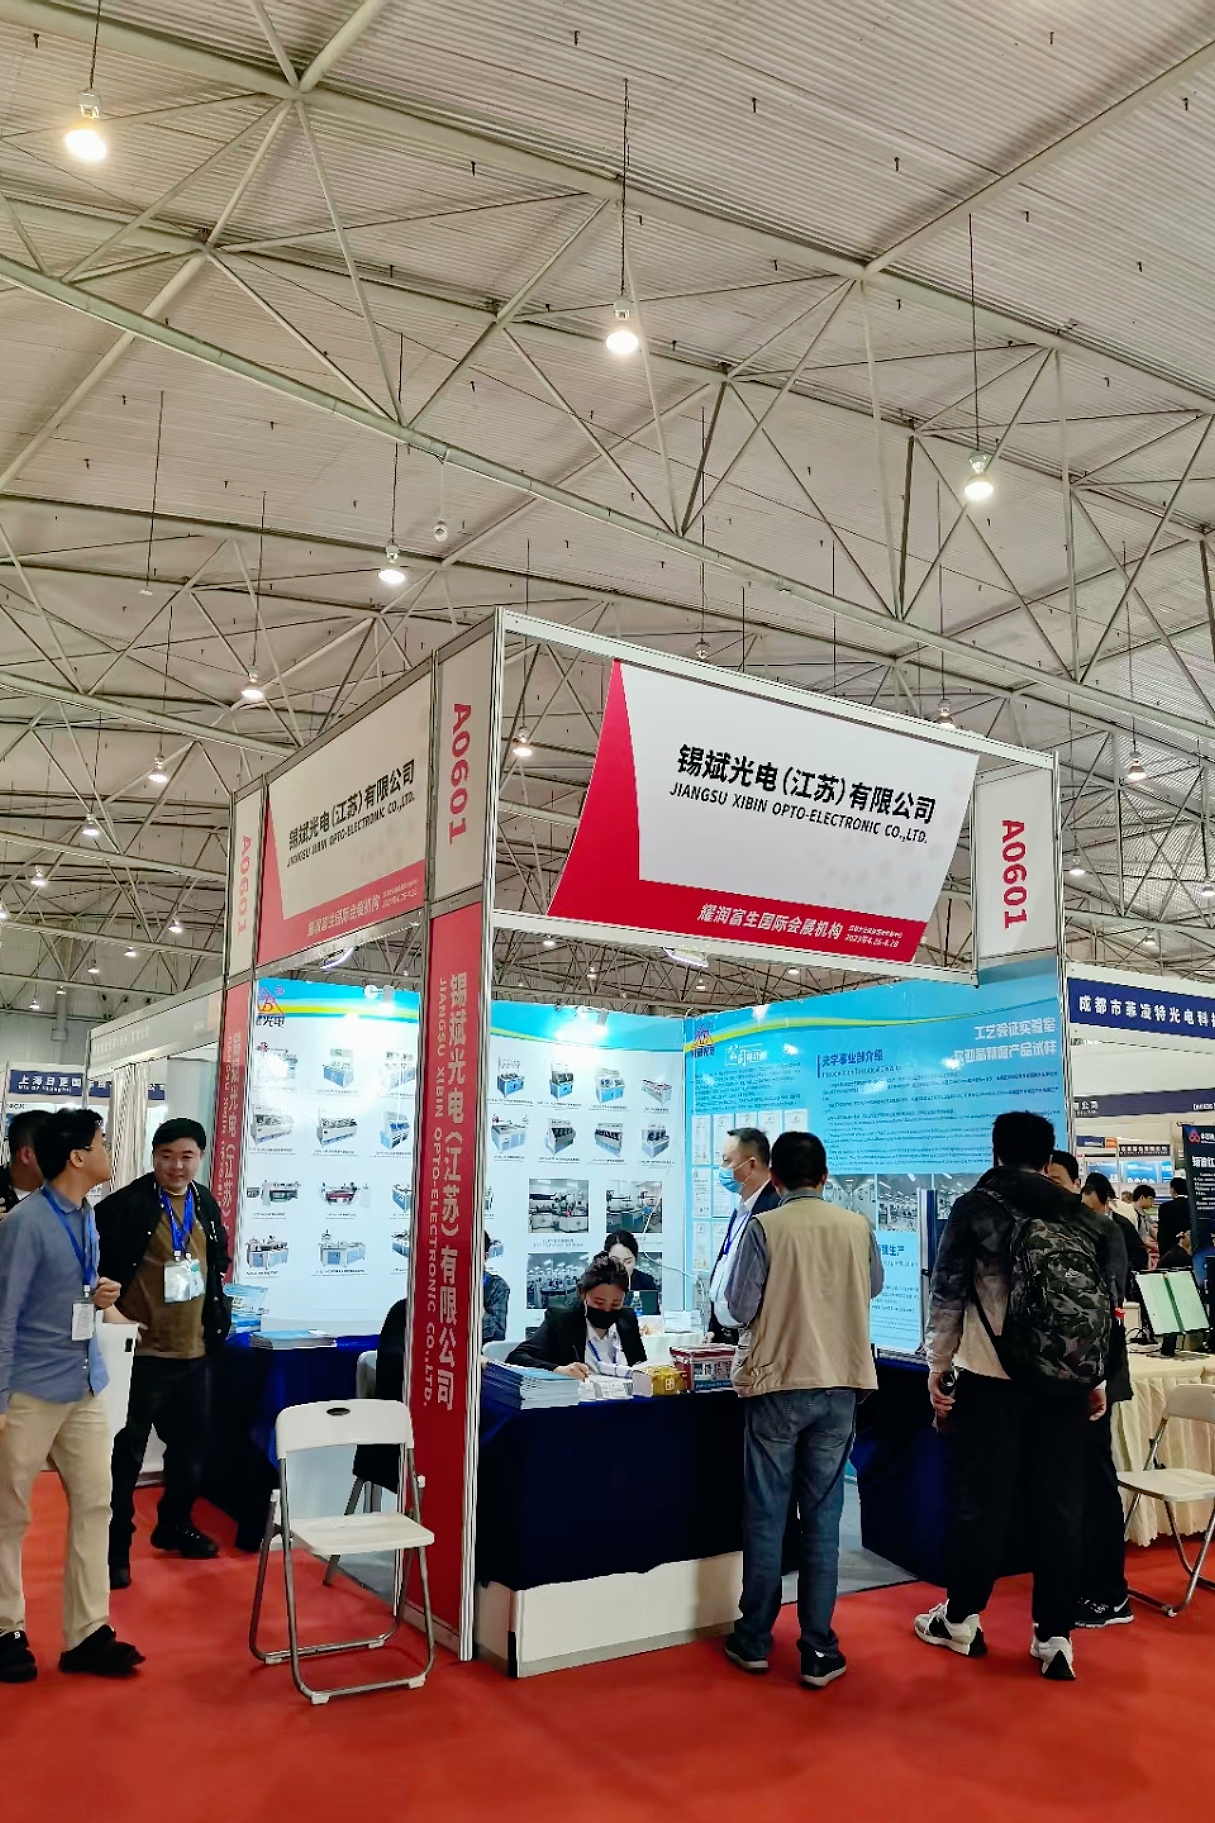 2023 The 22nd China International (West) Optoelectronic Industry Expo has come to a successful end!